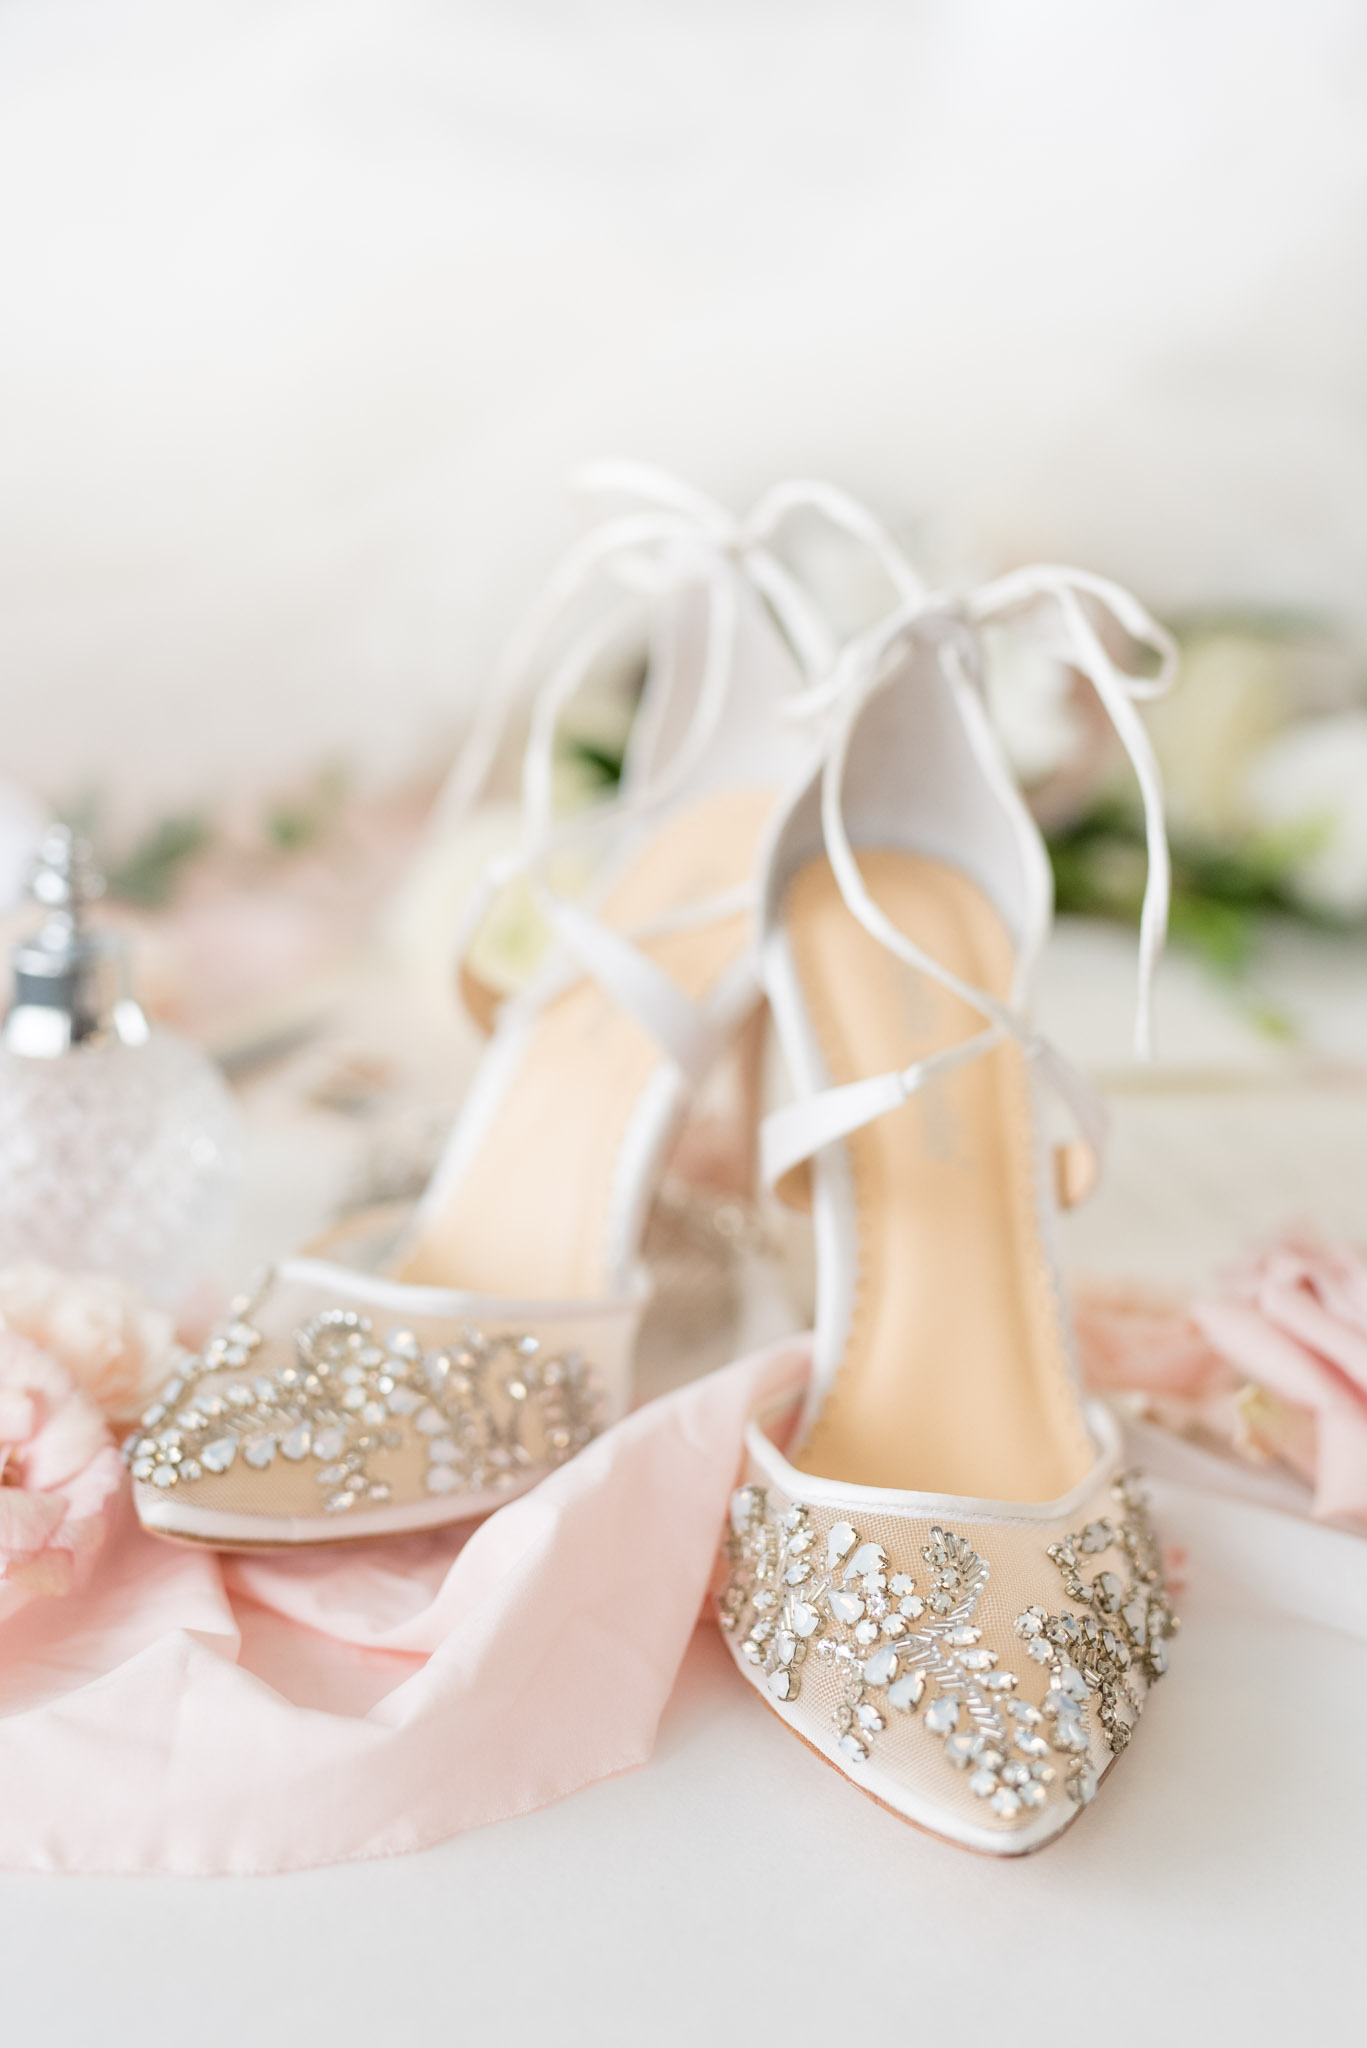 Jeweled wedding shoes sit with blush details.